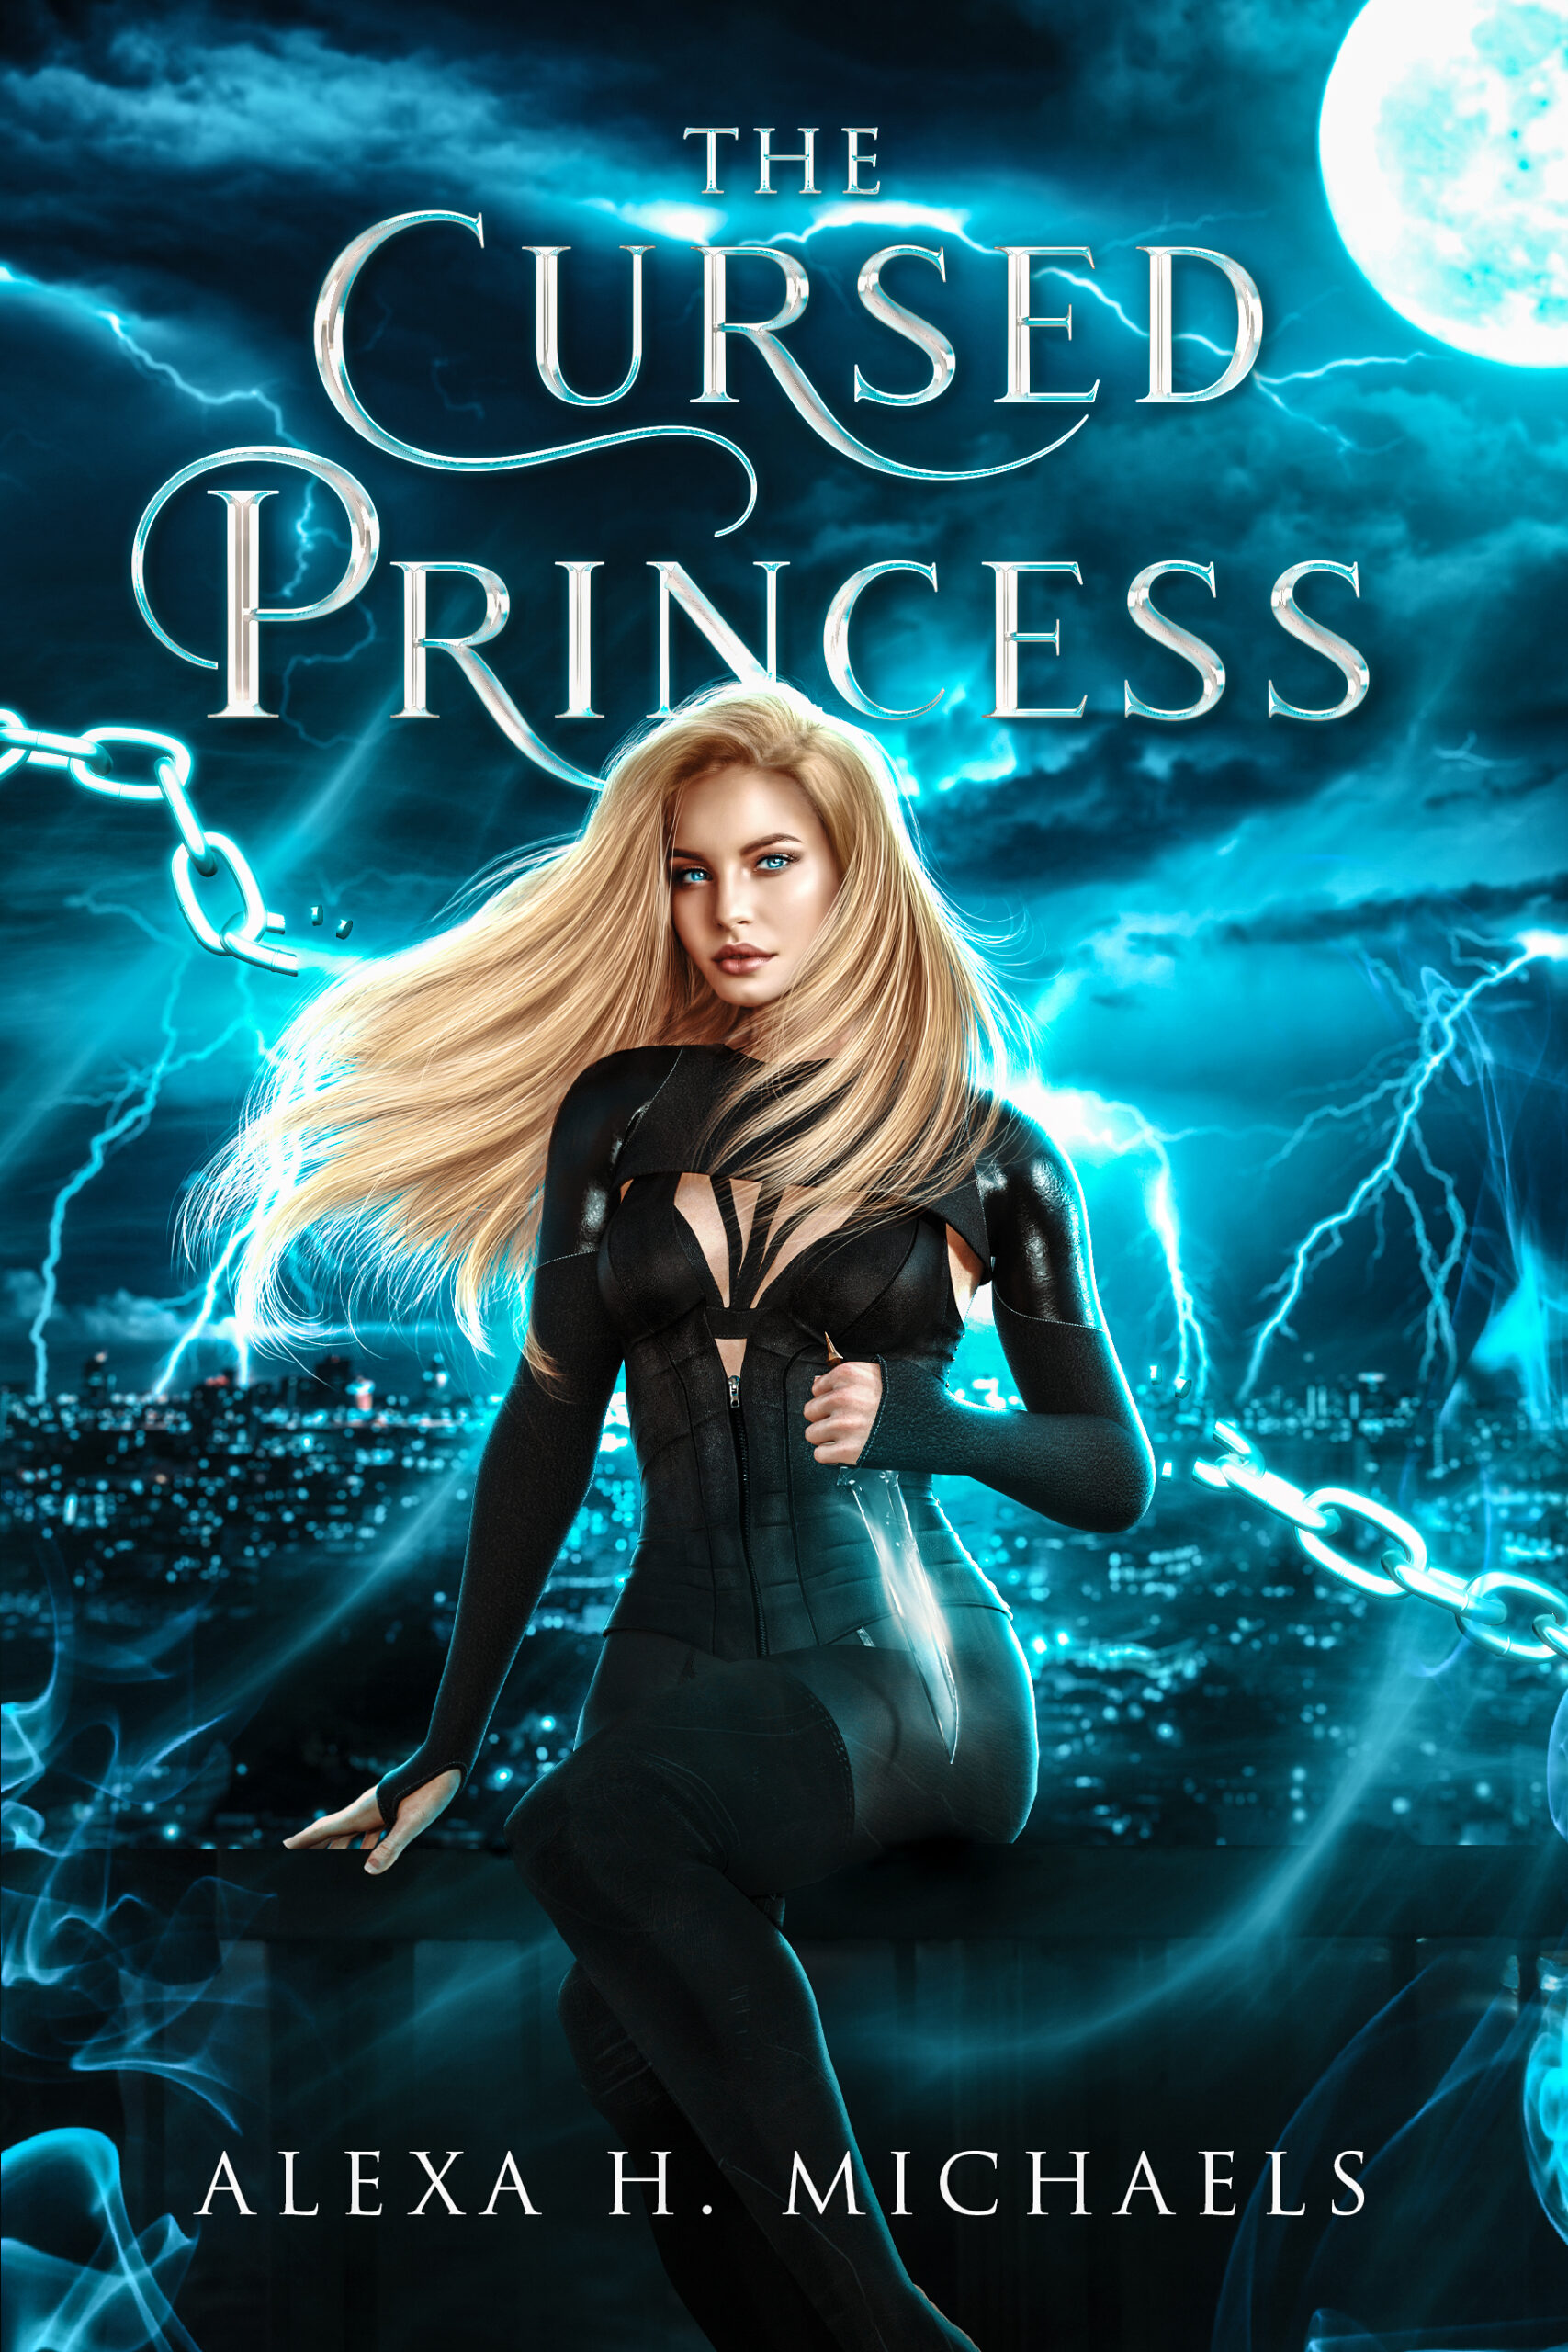 FREE: The Cursed Princess by Alexa H. Michaels